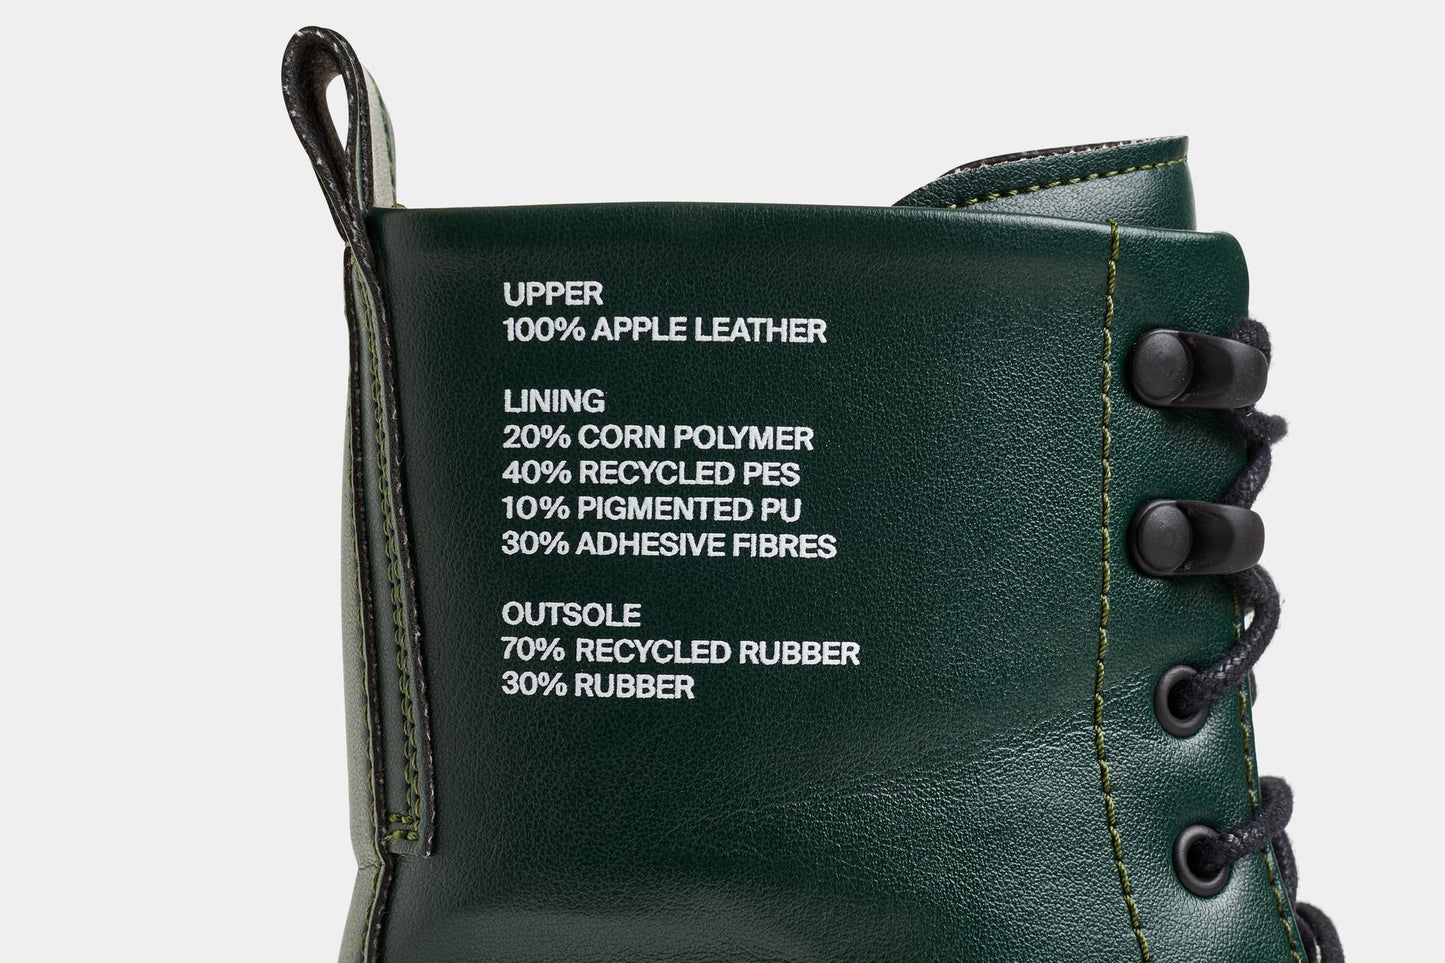 1992 Forest Green Apple Boots by Viron